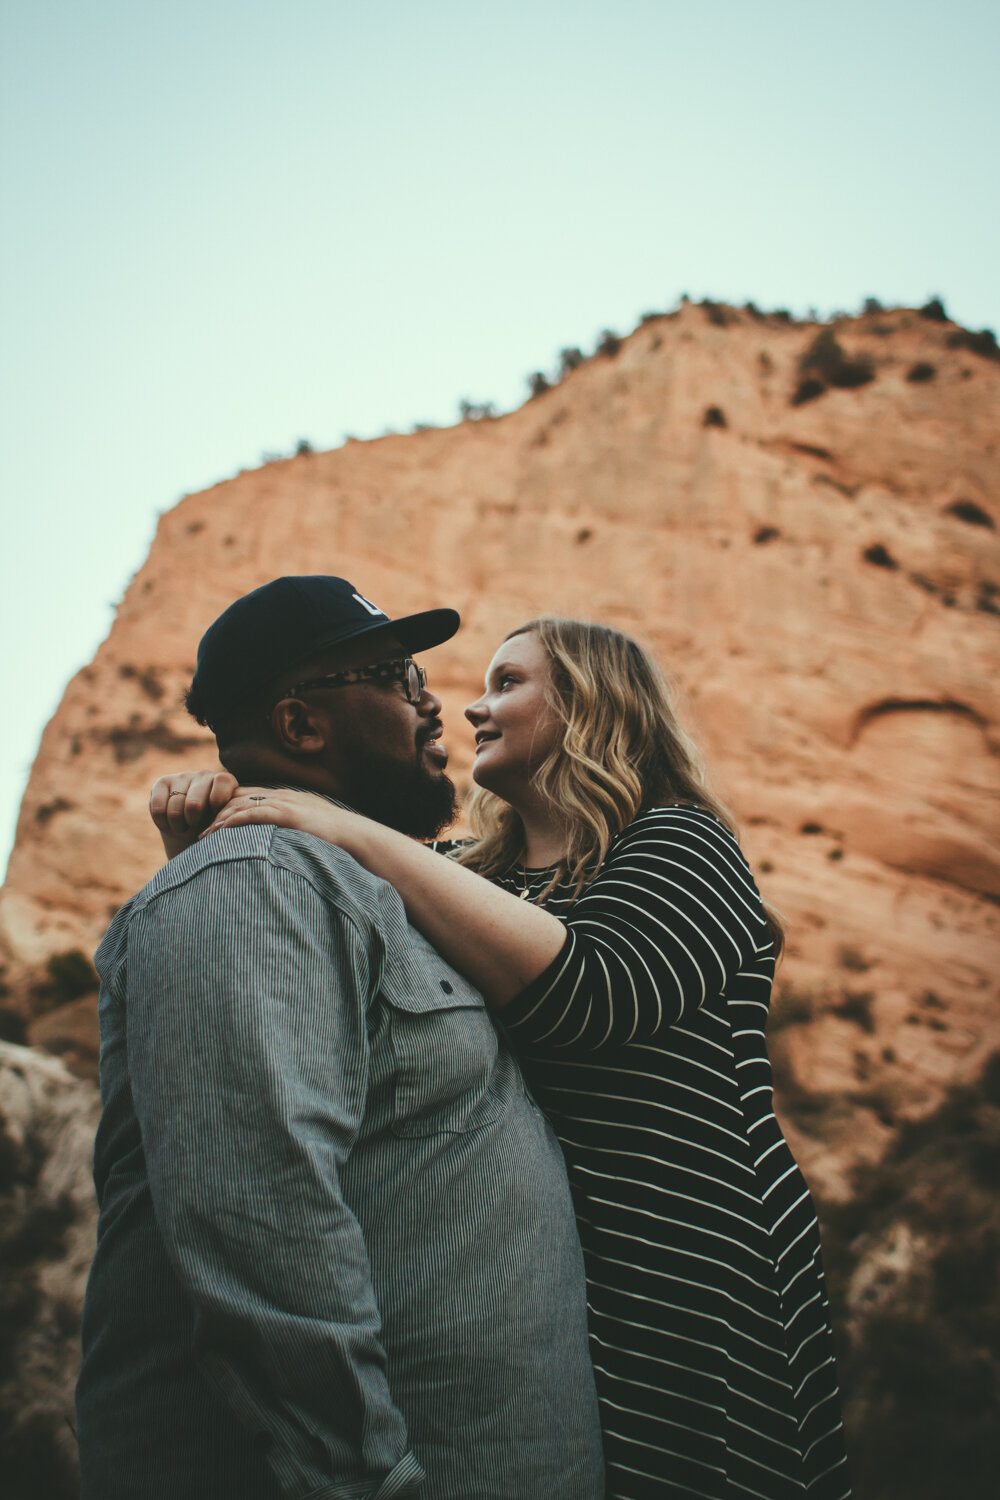 engagement engaged photography photographe marriage wedding photographer corse corsica california desert foothill ranch whiting lifestyle Anza Creative-31.jpg